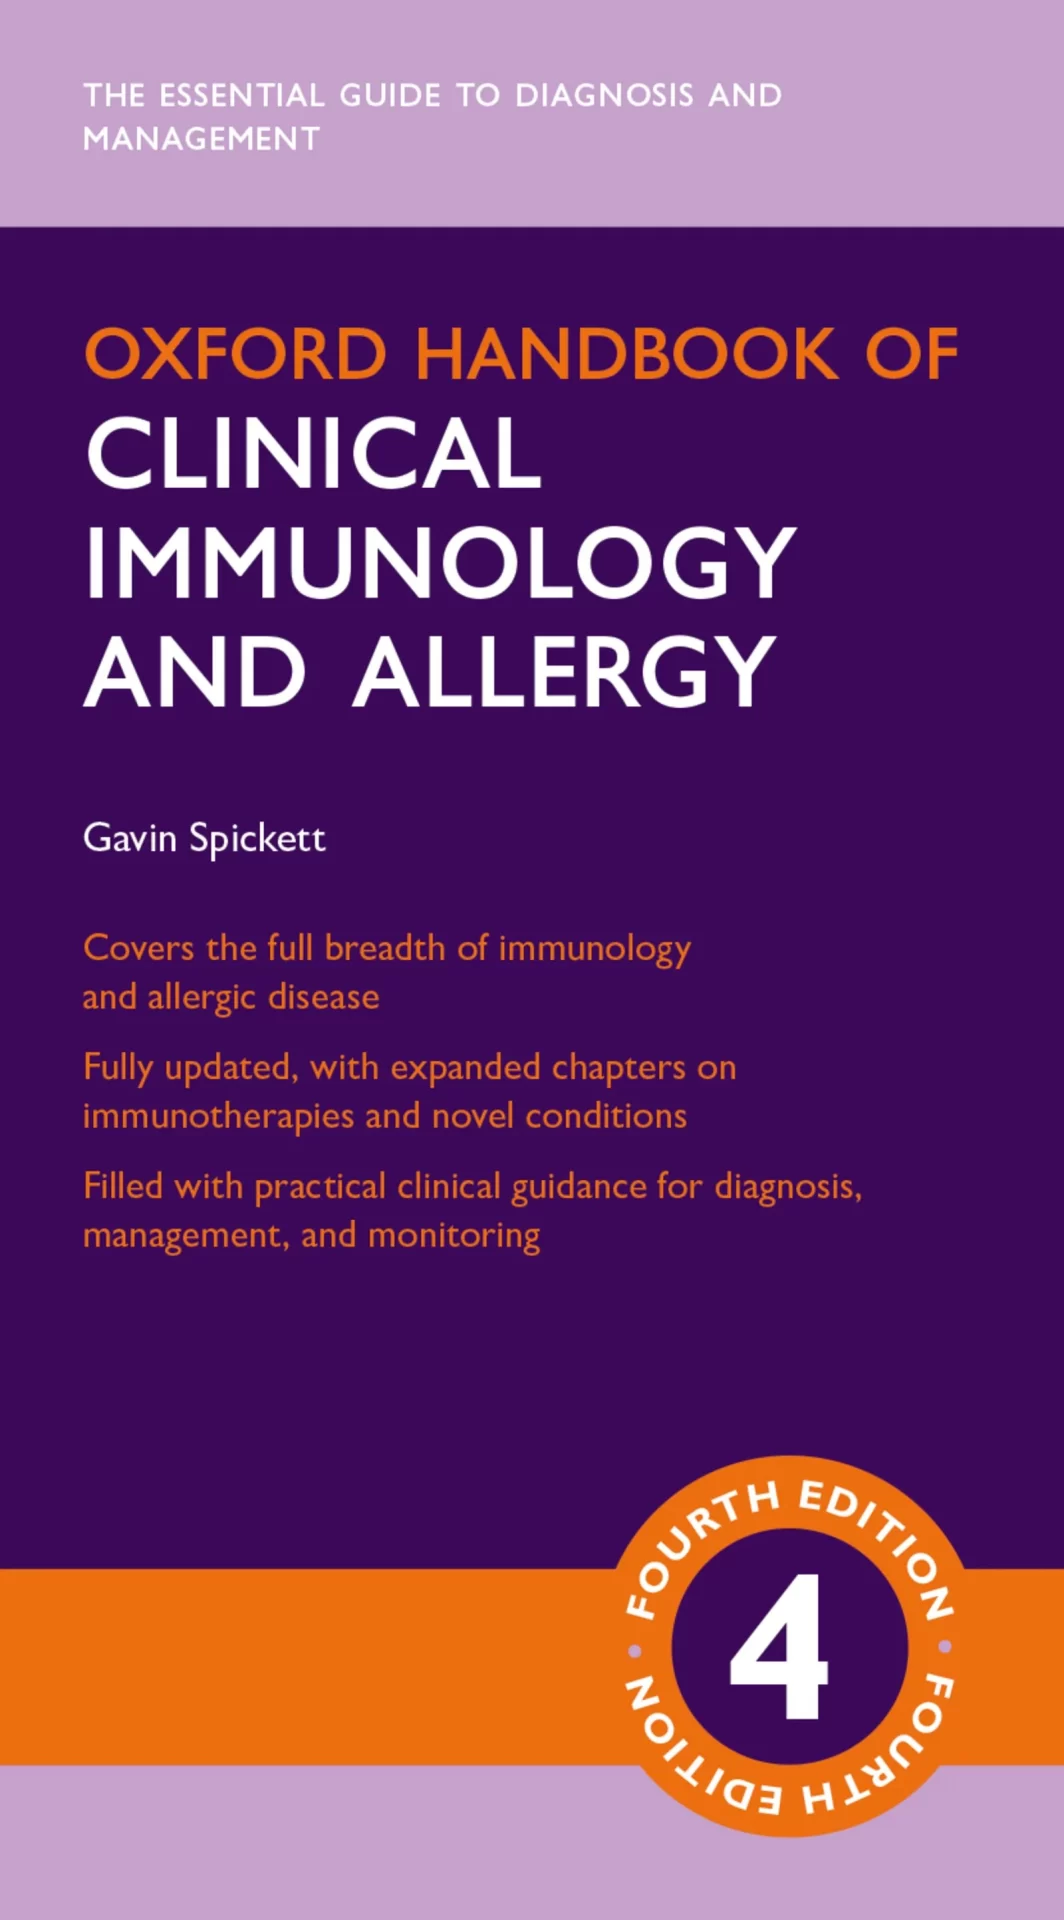 Oxford Handbook of Clinical Immunology and Allergy 4th Edition PDF